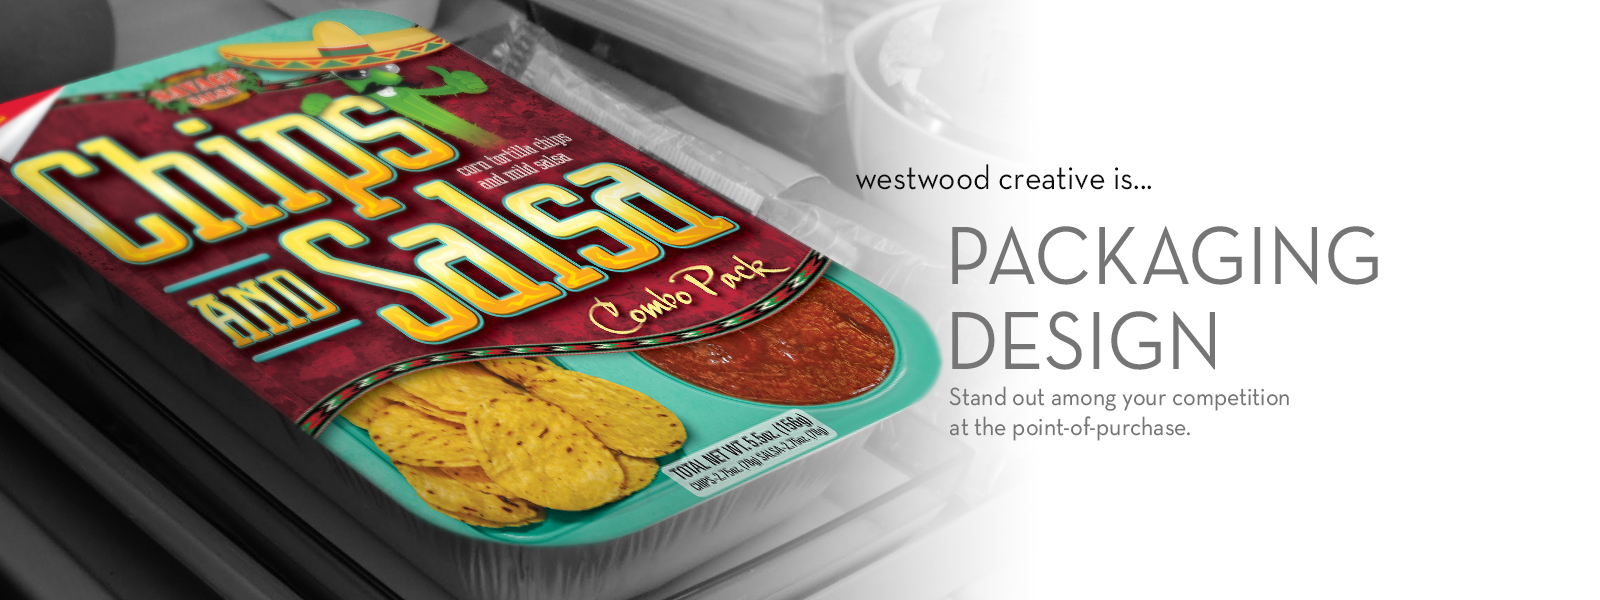 Westwood Creative Packaging Design Services